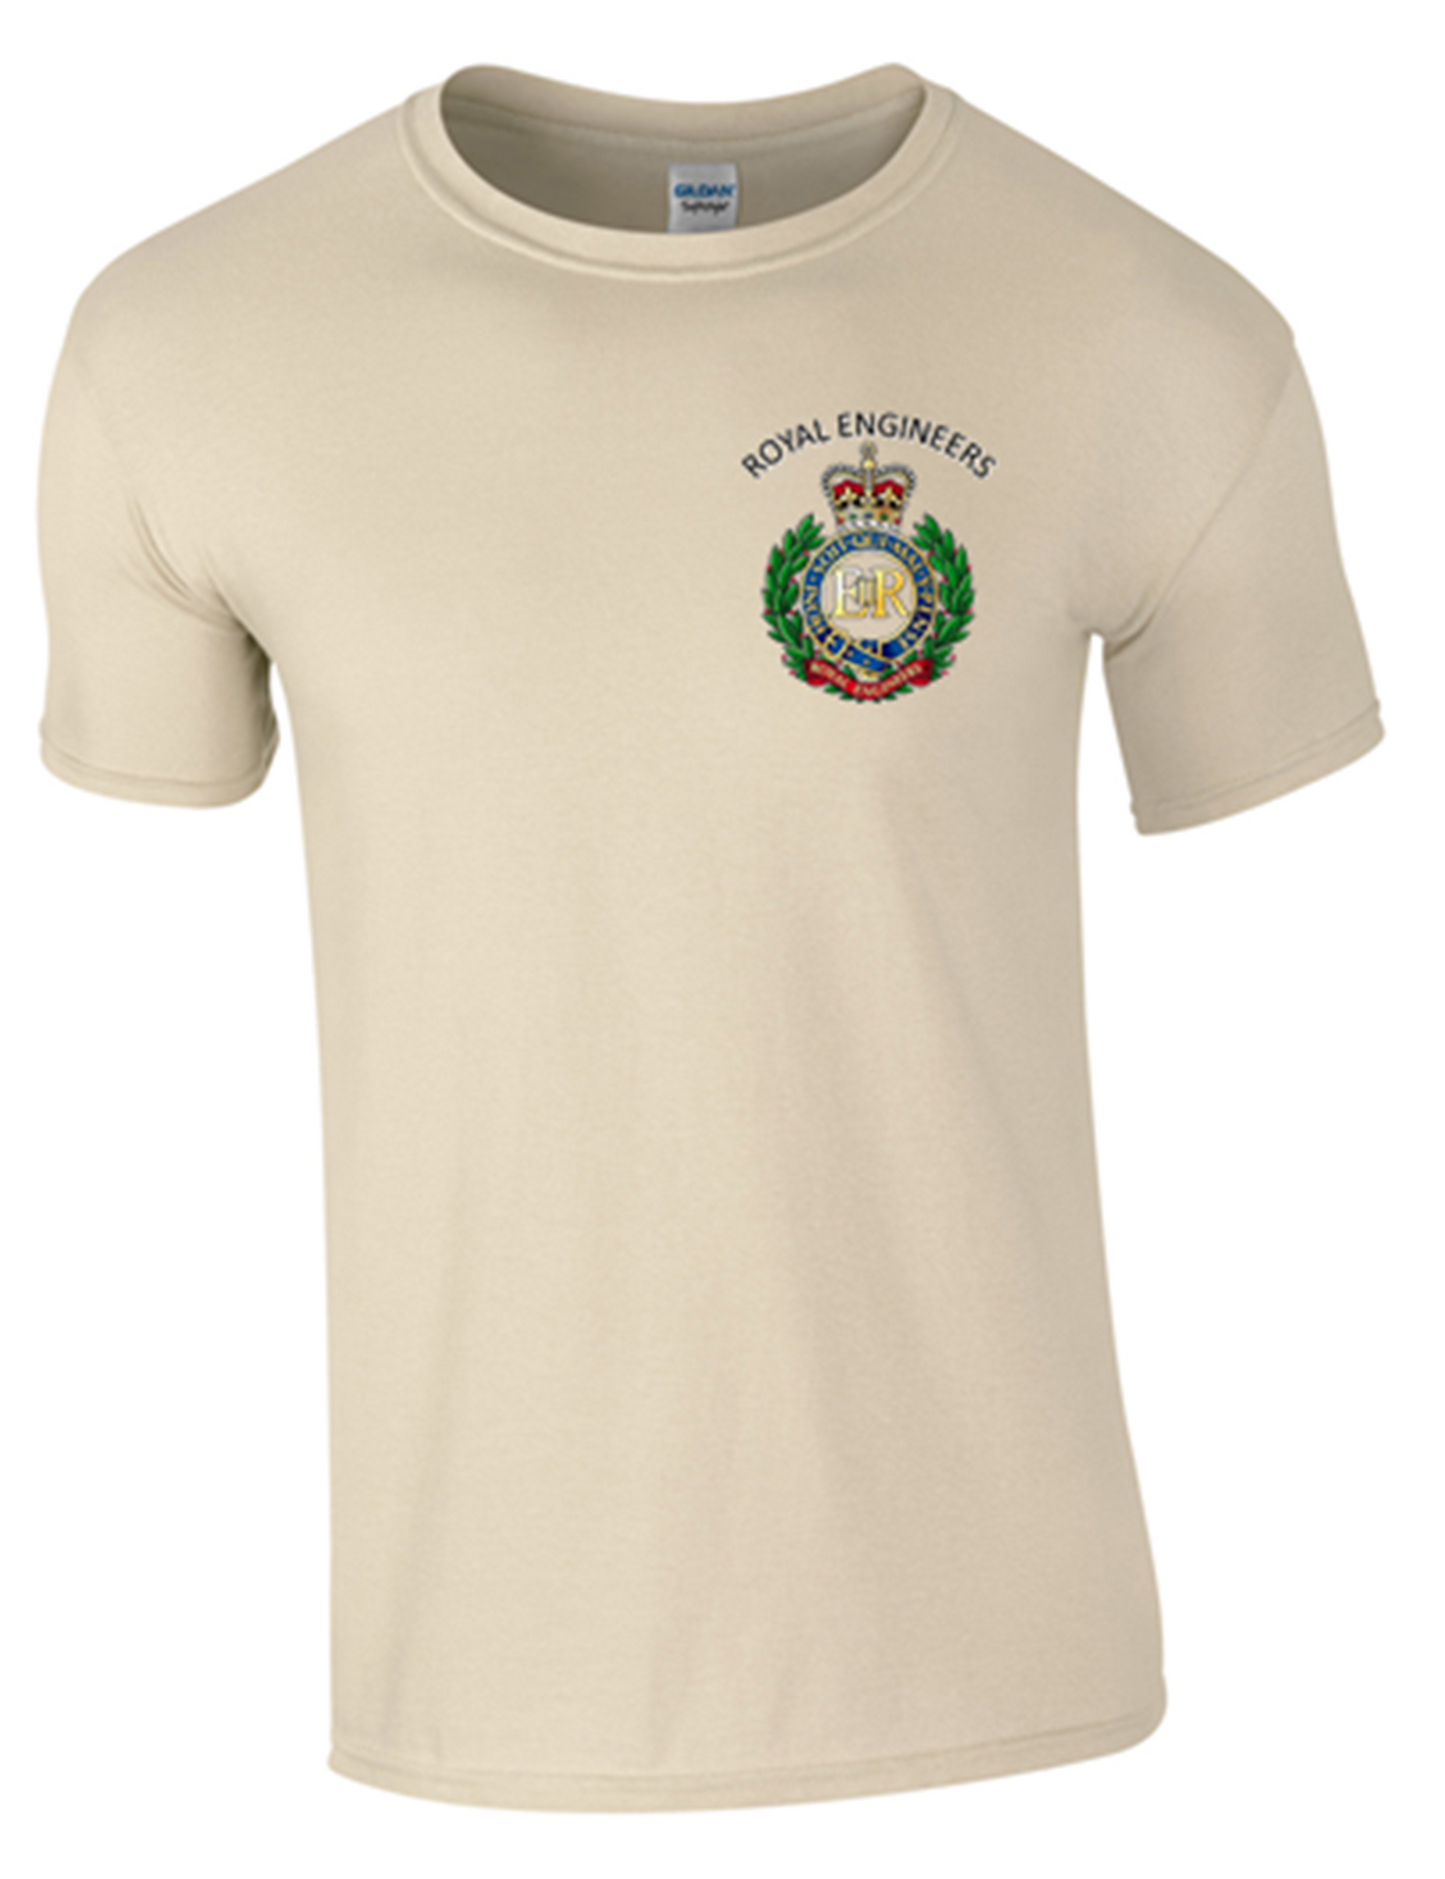 Ministry of Defence T-Shirt with Royal Engineers Front Only - Army 1157 kit S / SAND Army 1157 Kit Veterans Owned Business